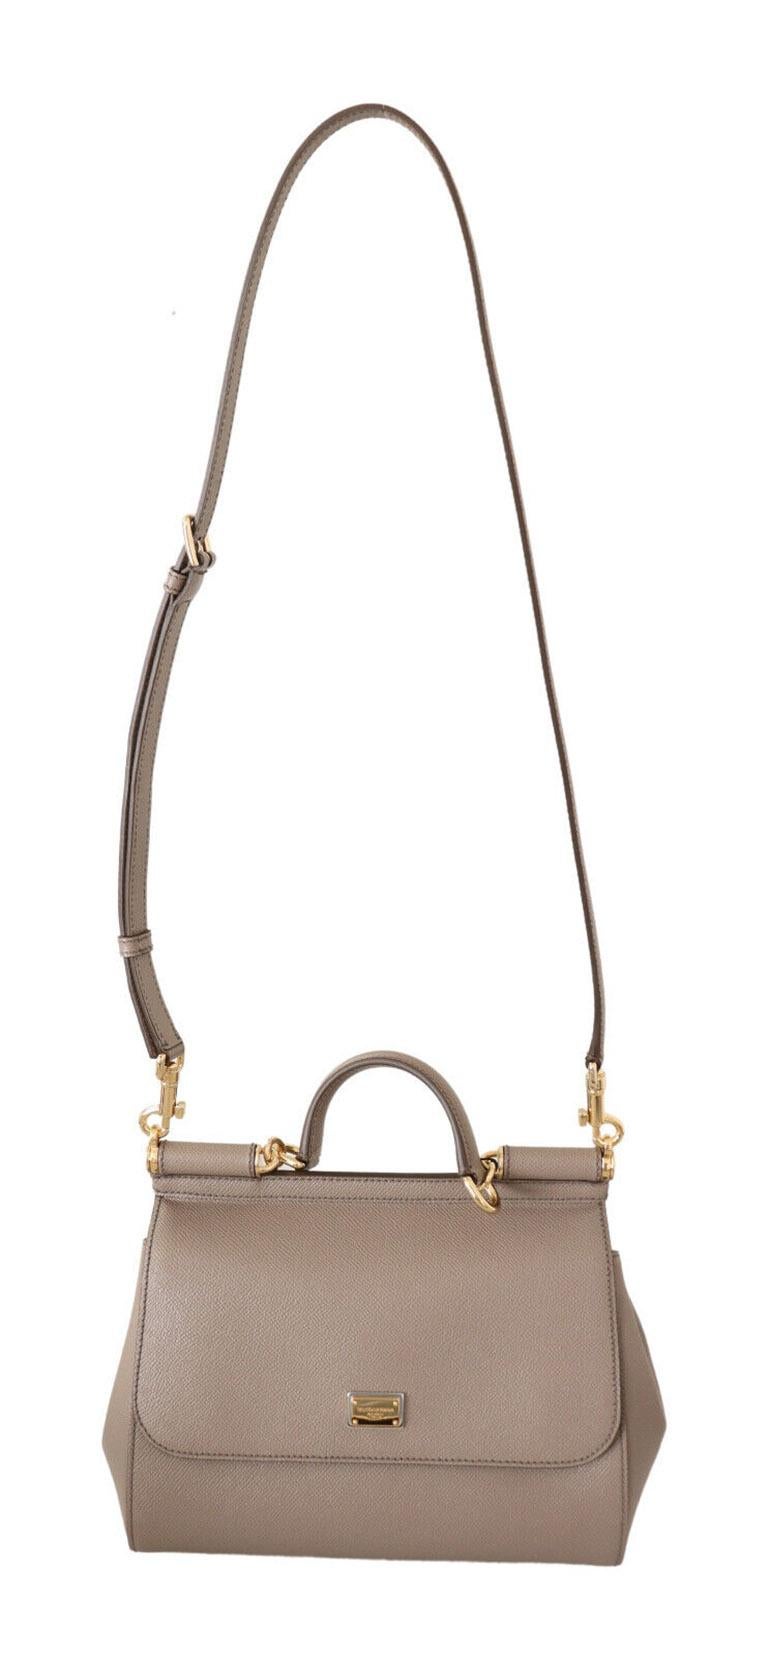 DOLCE & GABBANA

Gorgeous brand new with tags, 100% Authentic Dolce & Gabbana Women's Bag.

Model: SICILY

Material: Leather

Color: Beige with gold metal detailing

Strap: One handle, one detachable and adjustable shoulder strap

Magnetic flap